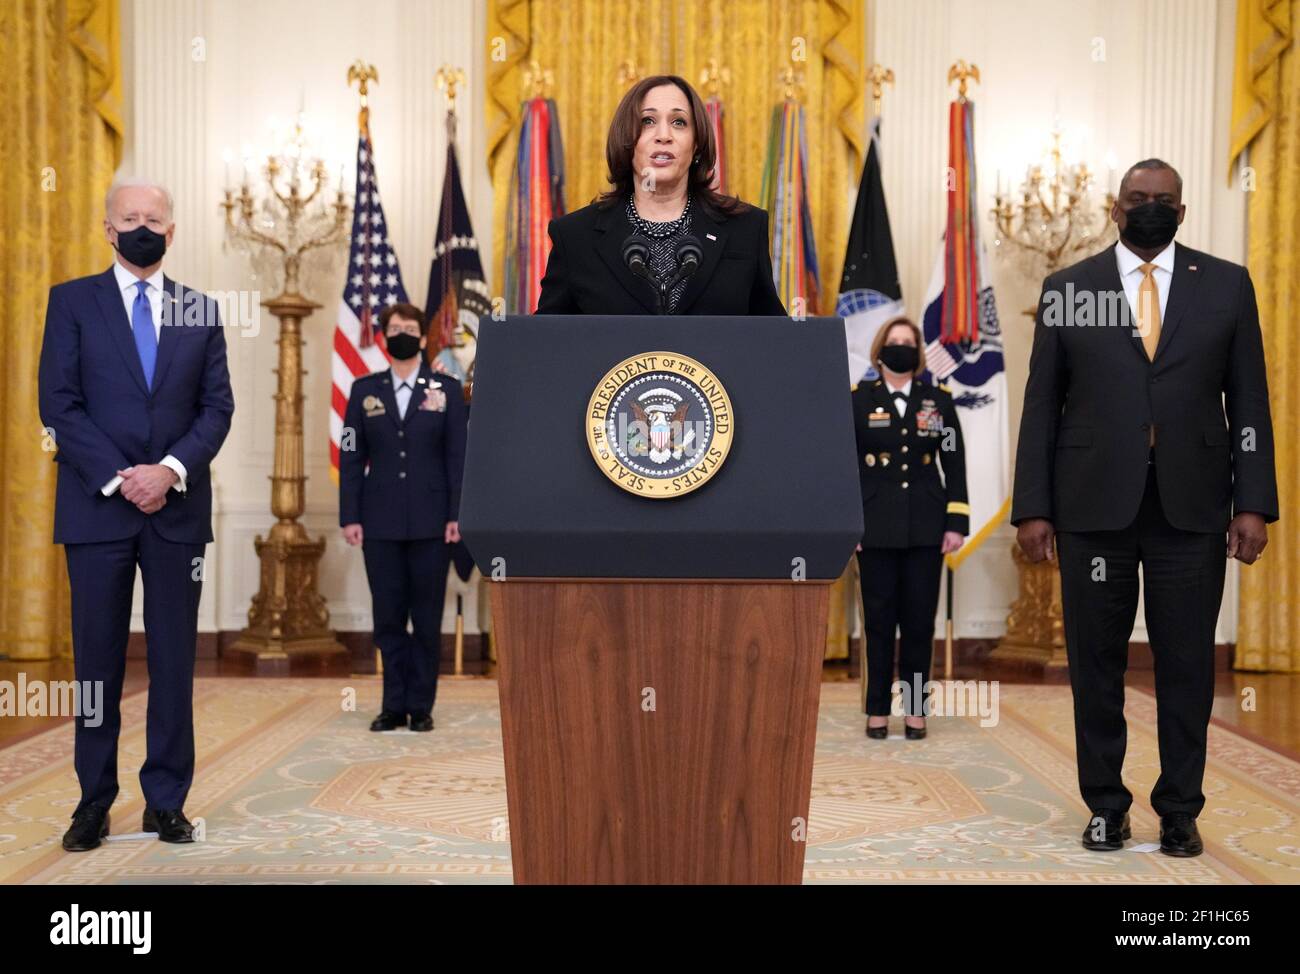 United States Vice President Kamala Harris delivers remarks at President Joe Biden's Combatant Commander nomination event for, Air Force Gen. Jacqueline Van Ovost and Army Lt. Gen. Laura Richardson in the East Room at the White House in Washington, DC on Monday, March 8, 2021. Ovost, has been nominated to lead the Transportation Command and Richardson, has been nominated to lead military activities in Latin America at Southern Command. Defense Secretary Lloyd Austin also attended. Credit: Kevin Dietsch/Pool via CNP | usage worldwide Stock Photo